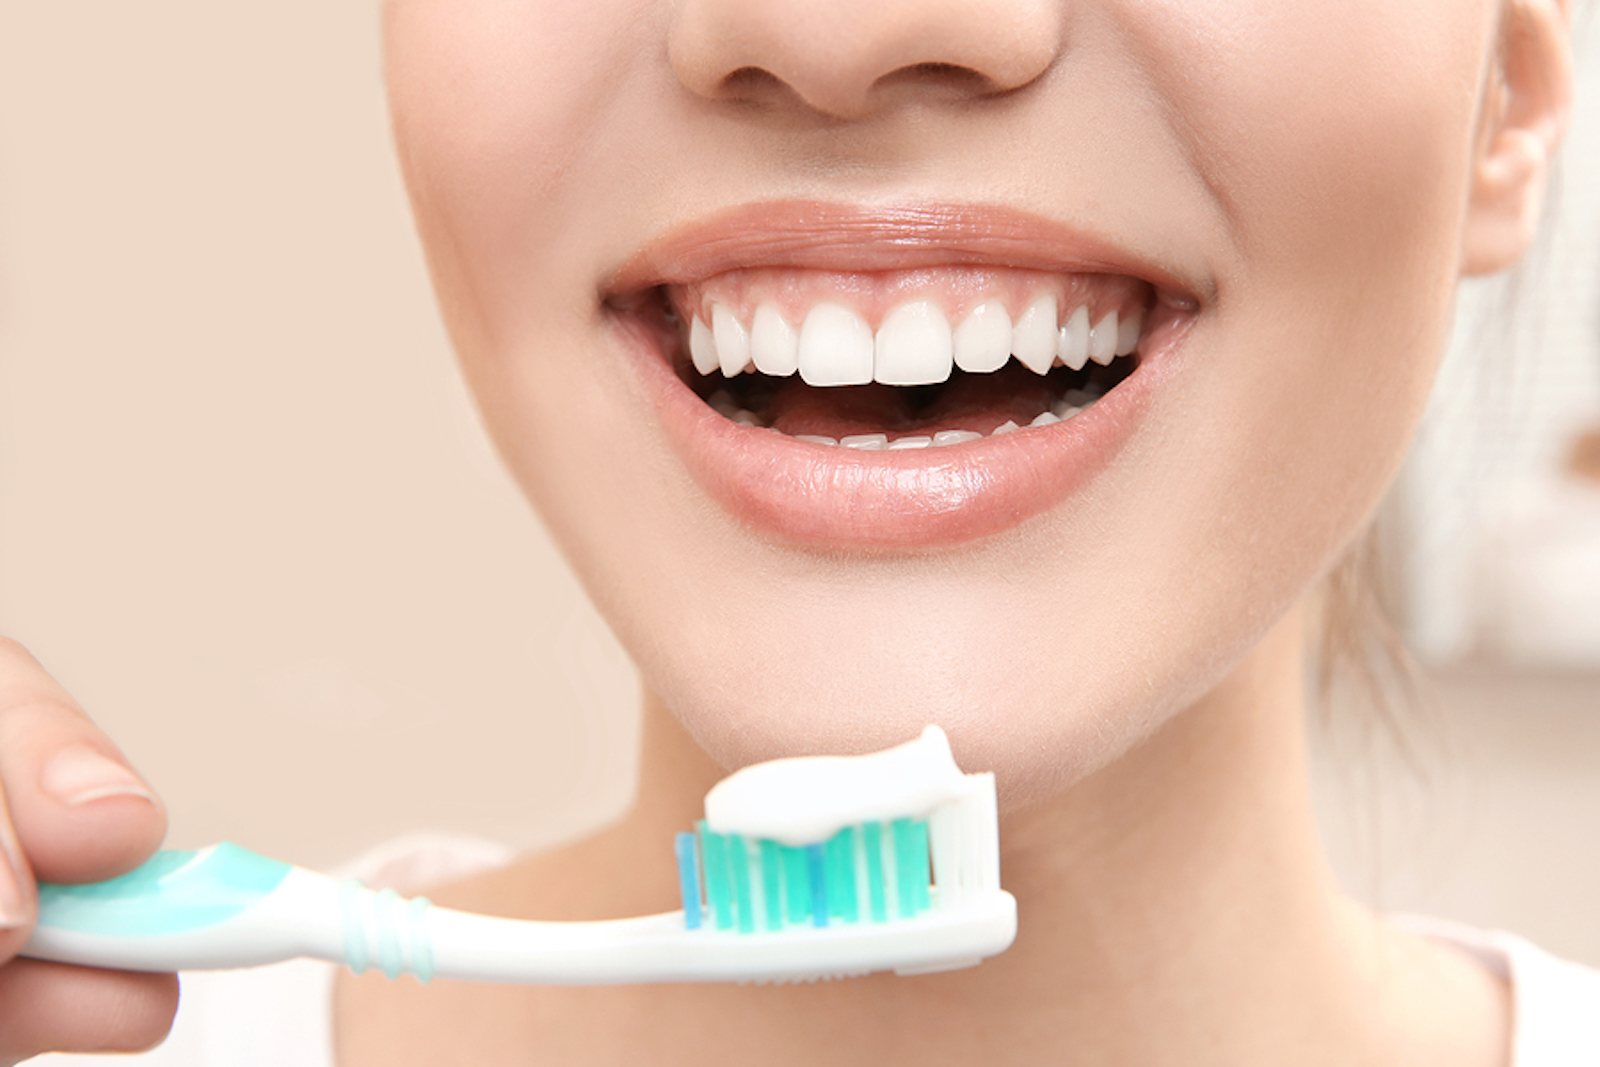 Top Tips To Maintaining Healthy Teeth And Gums